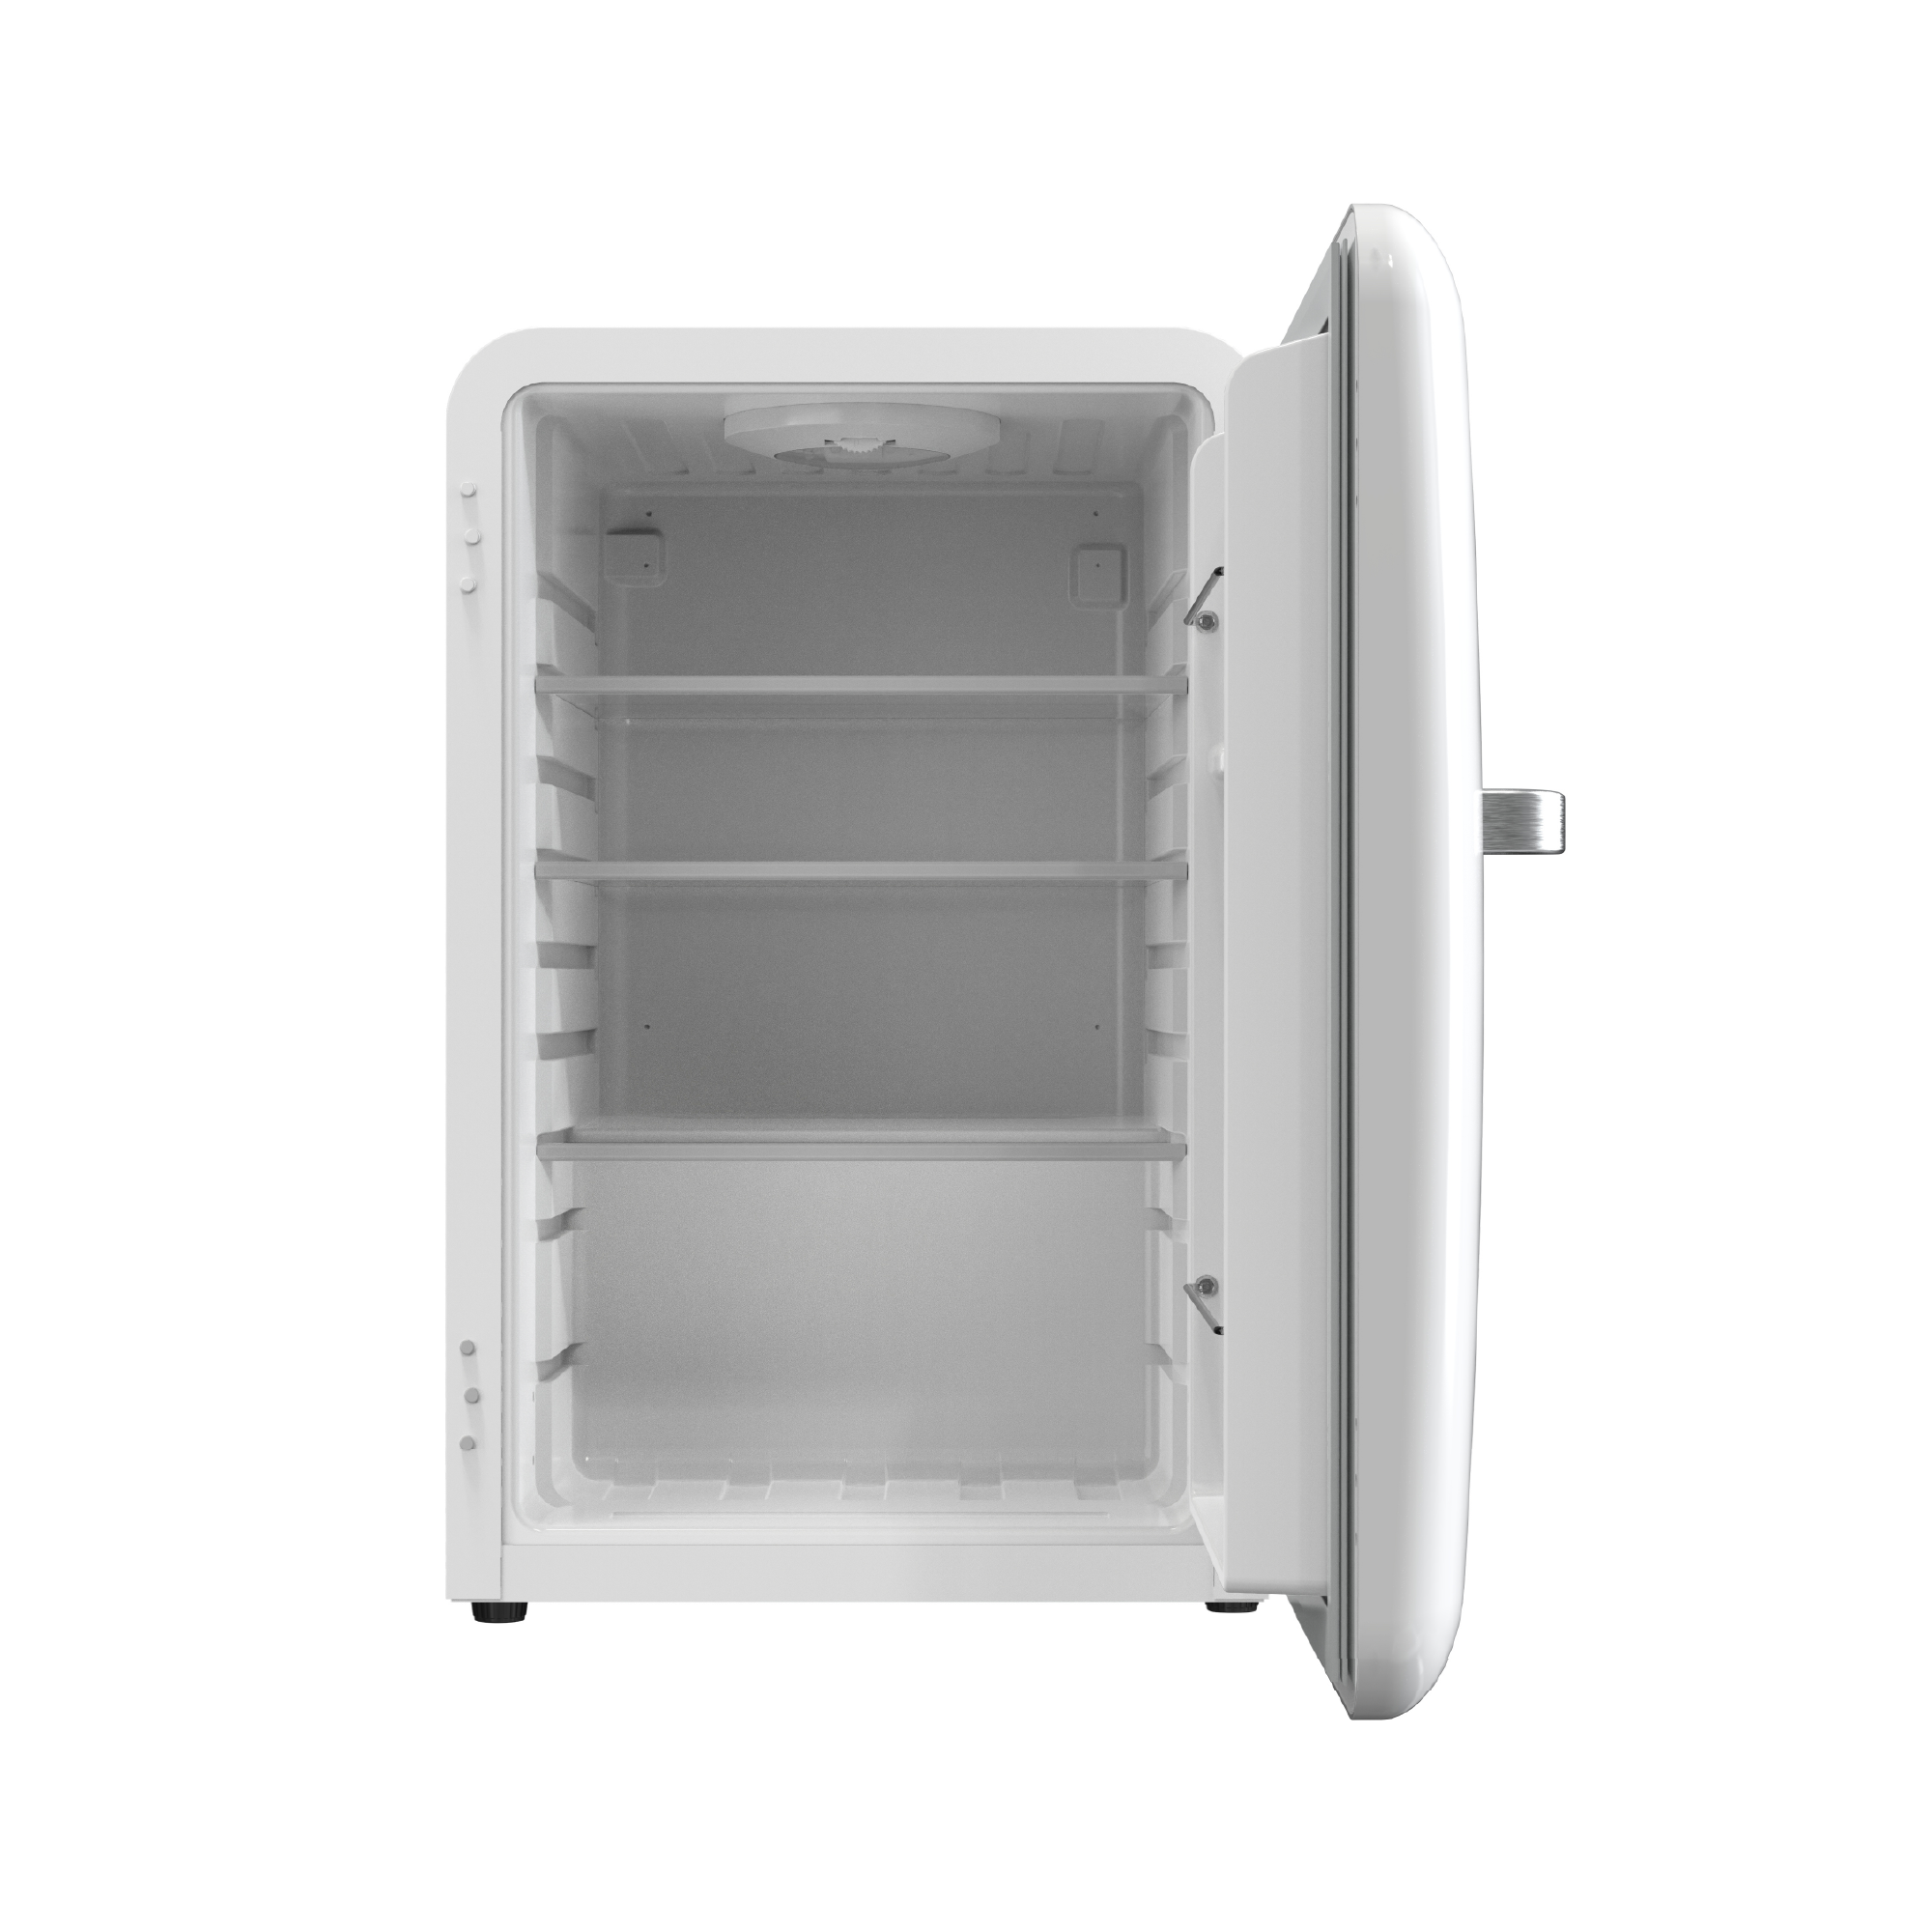 Front view of a 2.5 Cu Ft White Iconic Beverage Retro Fridge with the door open, showcasing interior space featuring 3 glass shelves